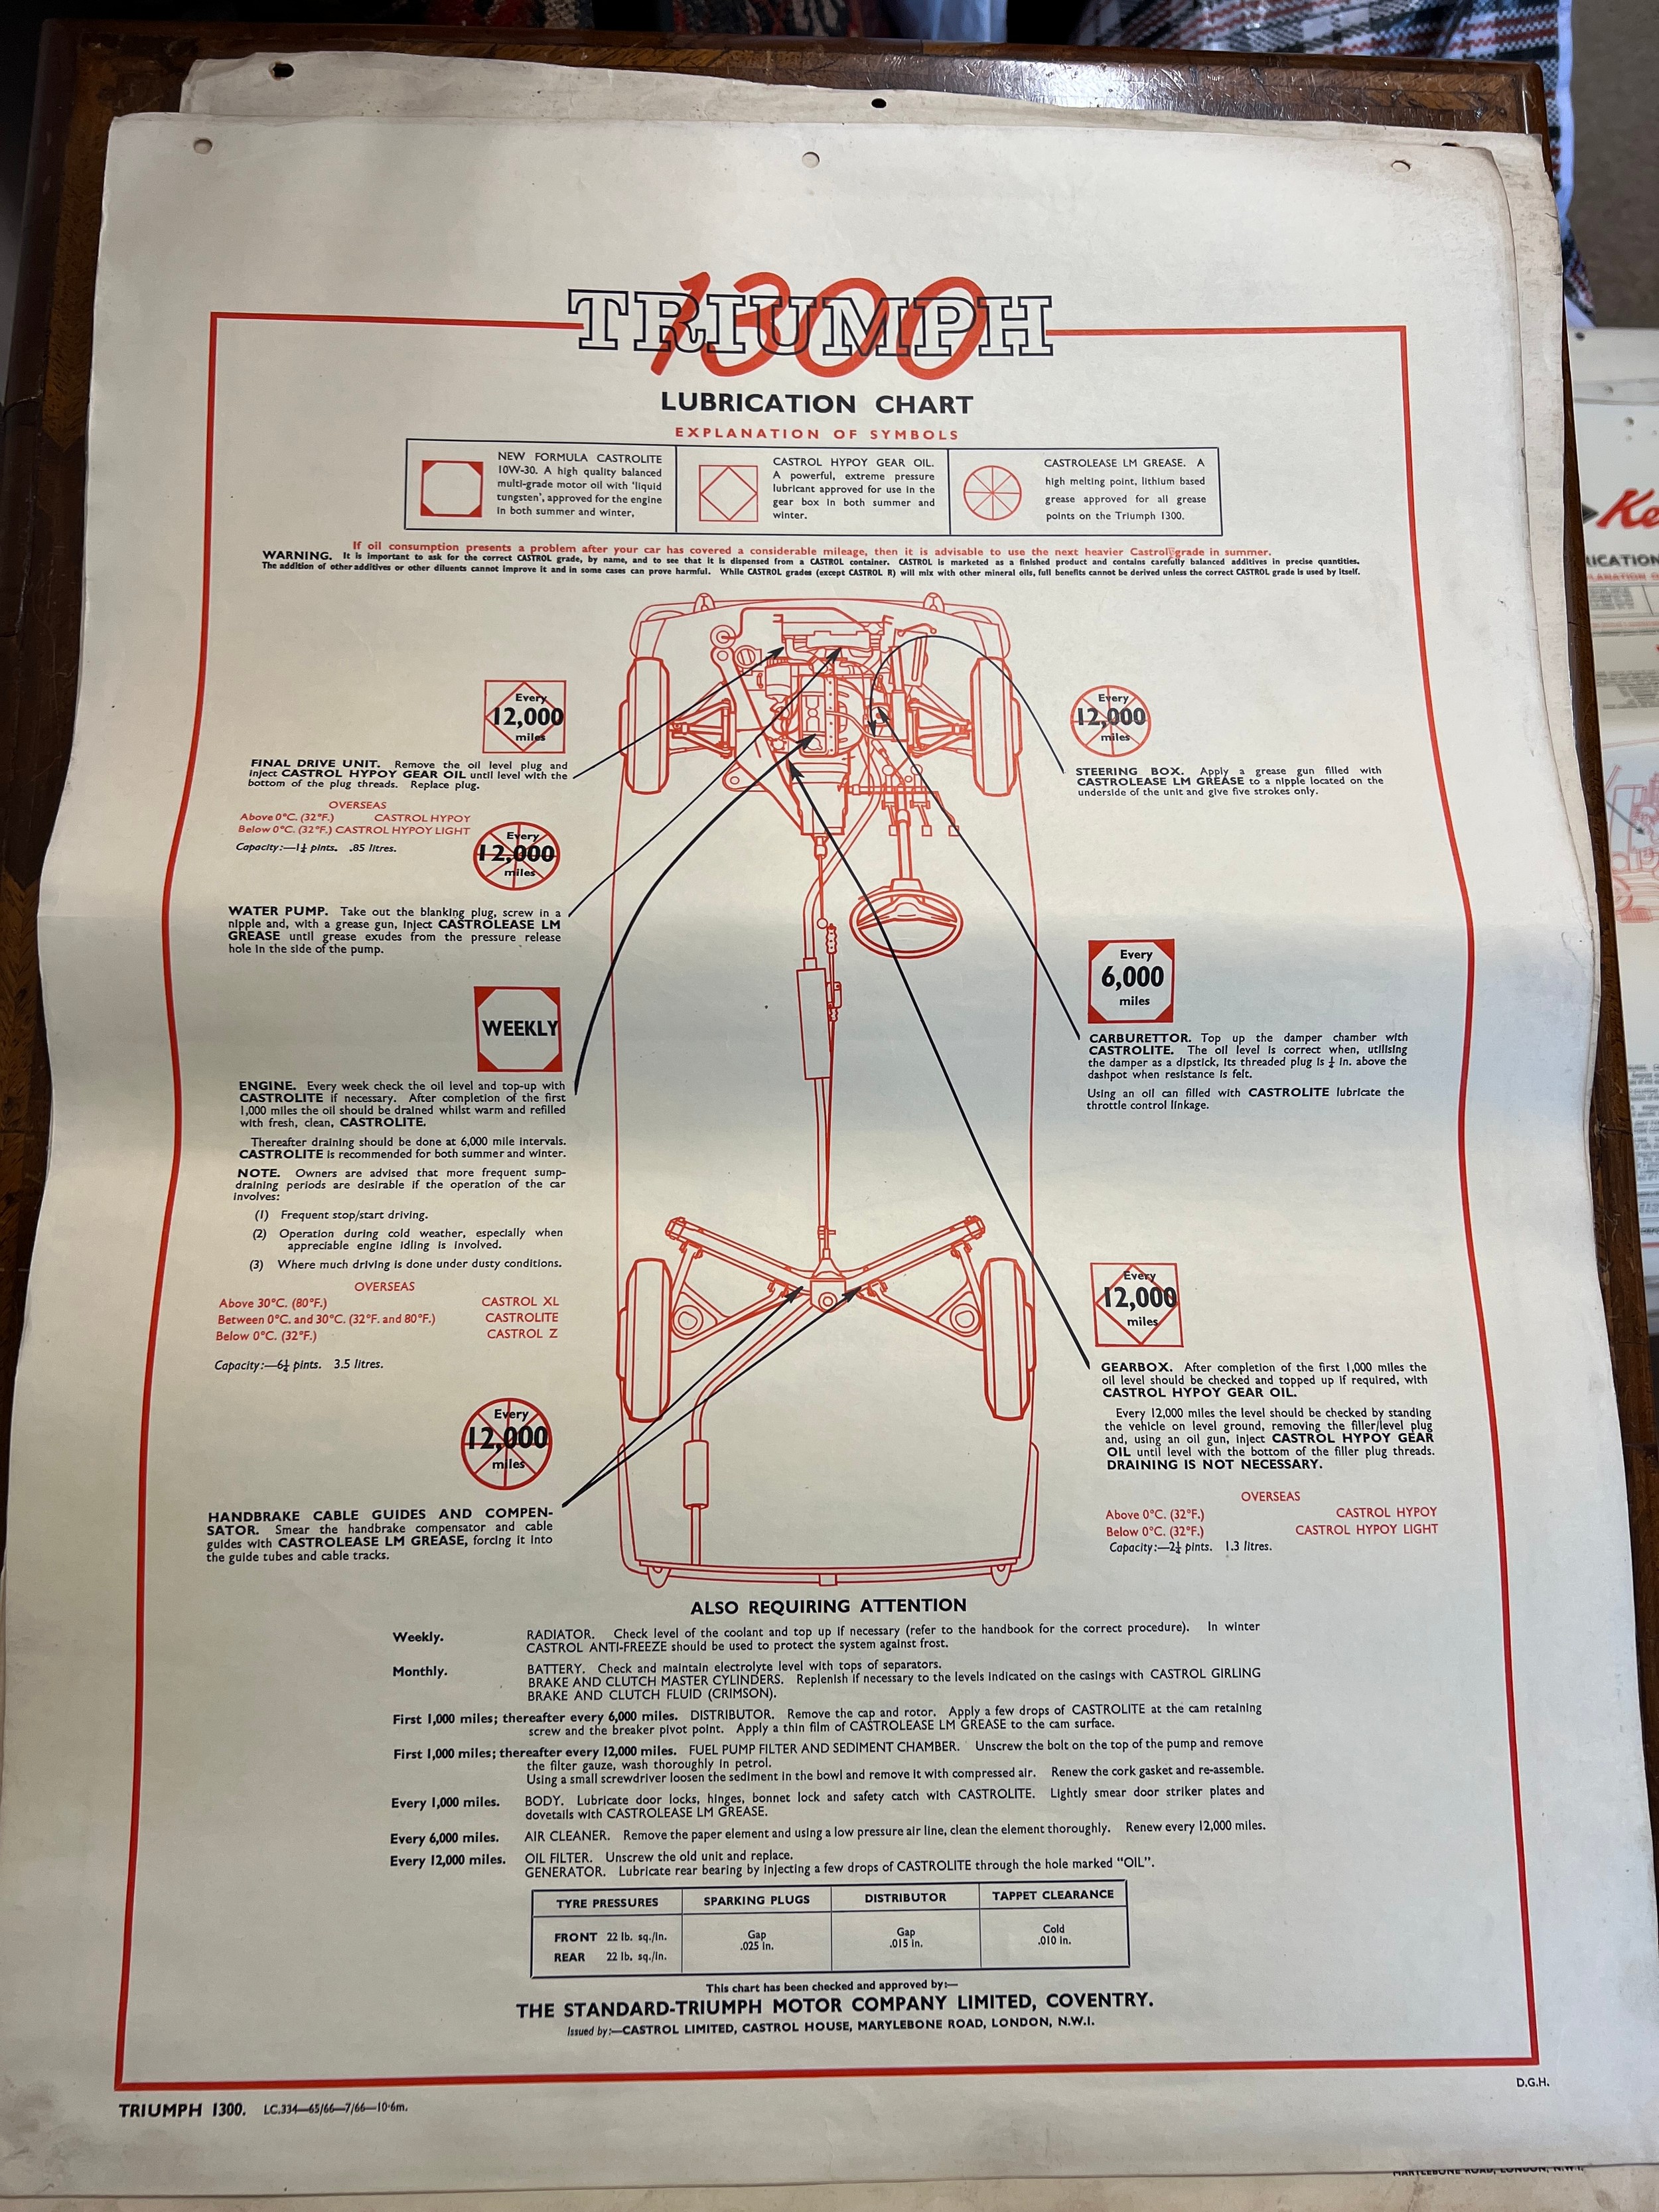 Thirty one vintage car lubrication charts to include Wolseley, Morris, MG 1100, Morris 1100, - Image 24 of 31